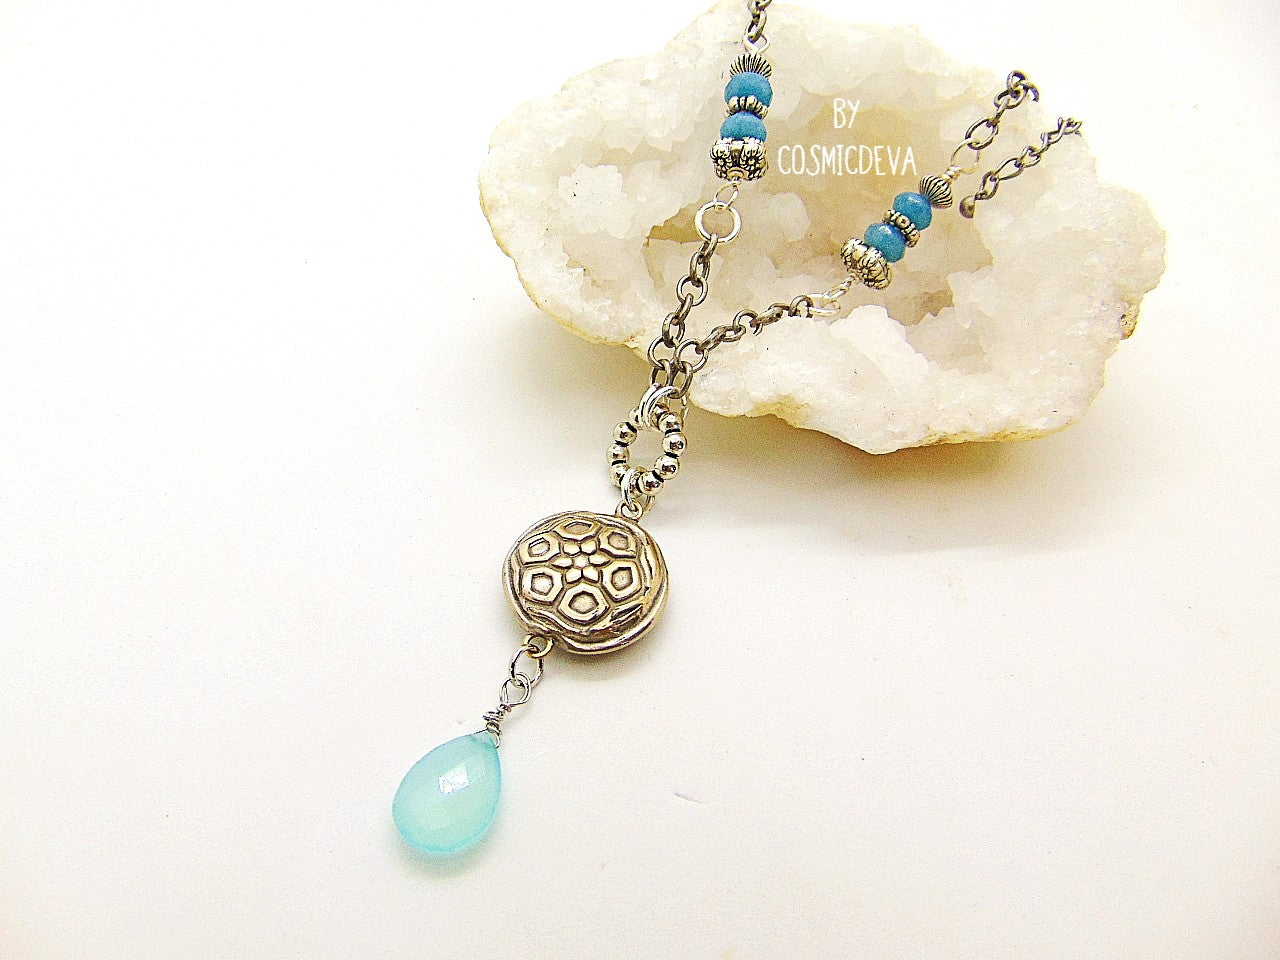 Beautiful handmade silver bronze lentil pendant with a mandala texture and a large faceted briolette aqua blue chalcedony gemstone dangle bead. The large hand formed lentil bead is double sided with two different designs and so can be worn facing either side.  The pendant suspends from an 18 inch – 20-inch-long chain with accentual faceted Brazilian aquamarine abacus beads and Tibetan silver beads.